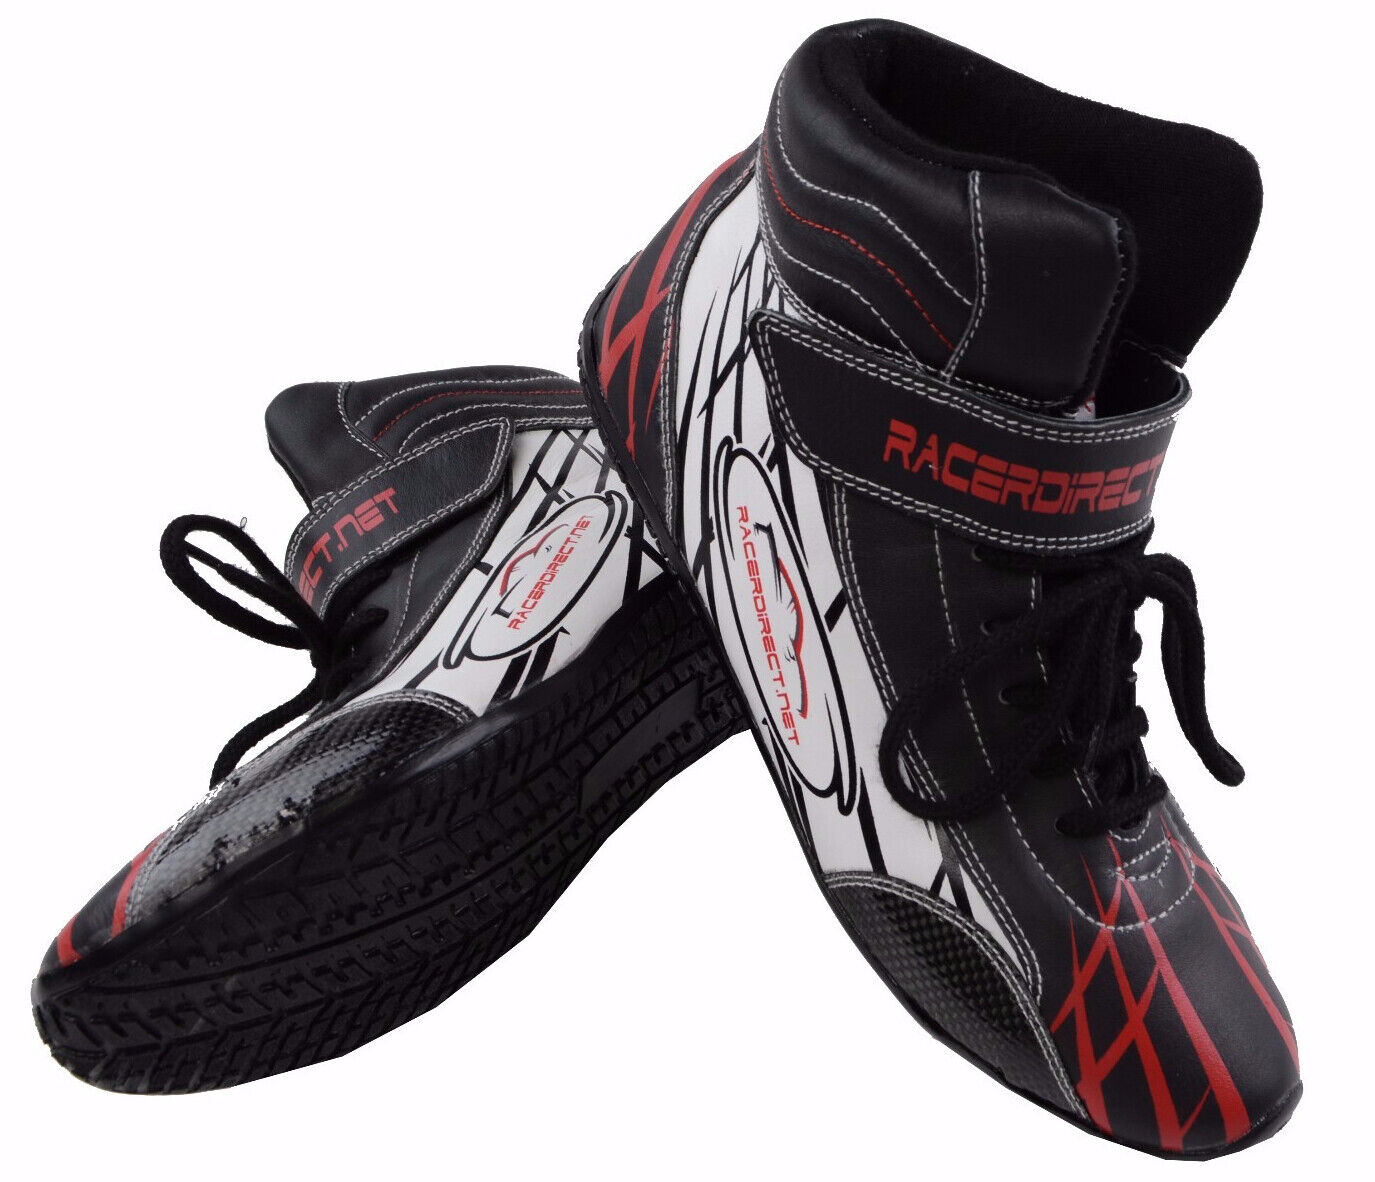 JR RACING DRIVING SHOES SFI 3.3 Free Shipping Cheap Bargain Gift OFFicial LEATHER GRAPHICS P SIZE 1-7 COOL